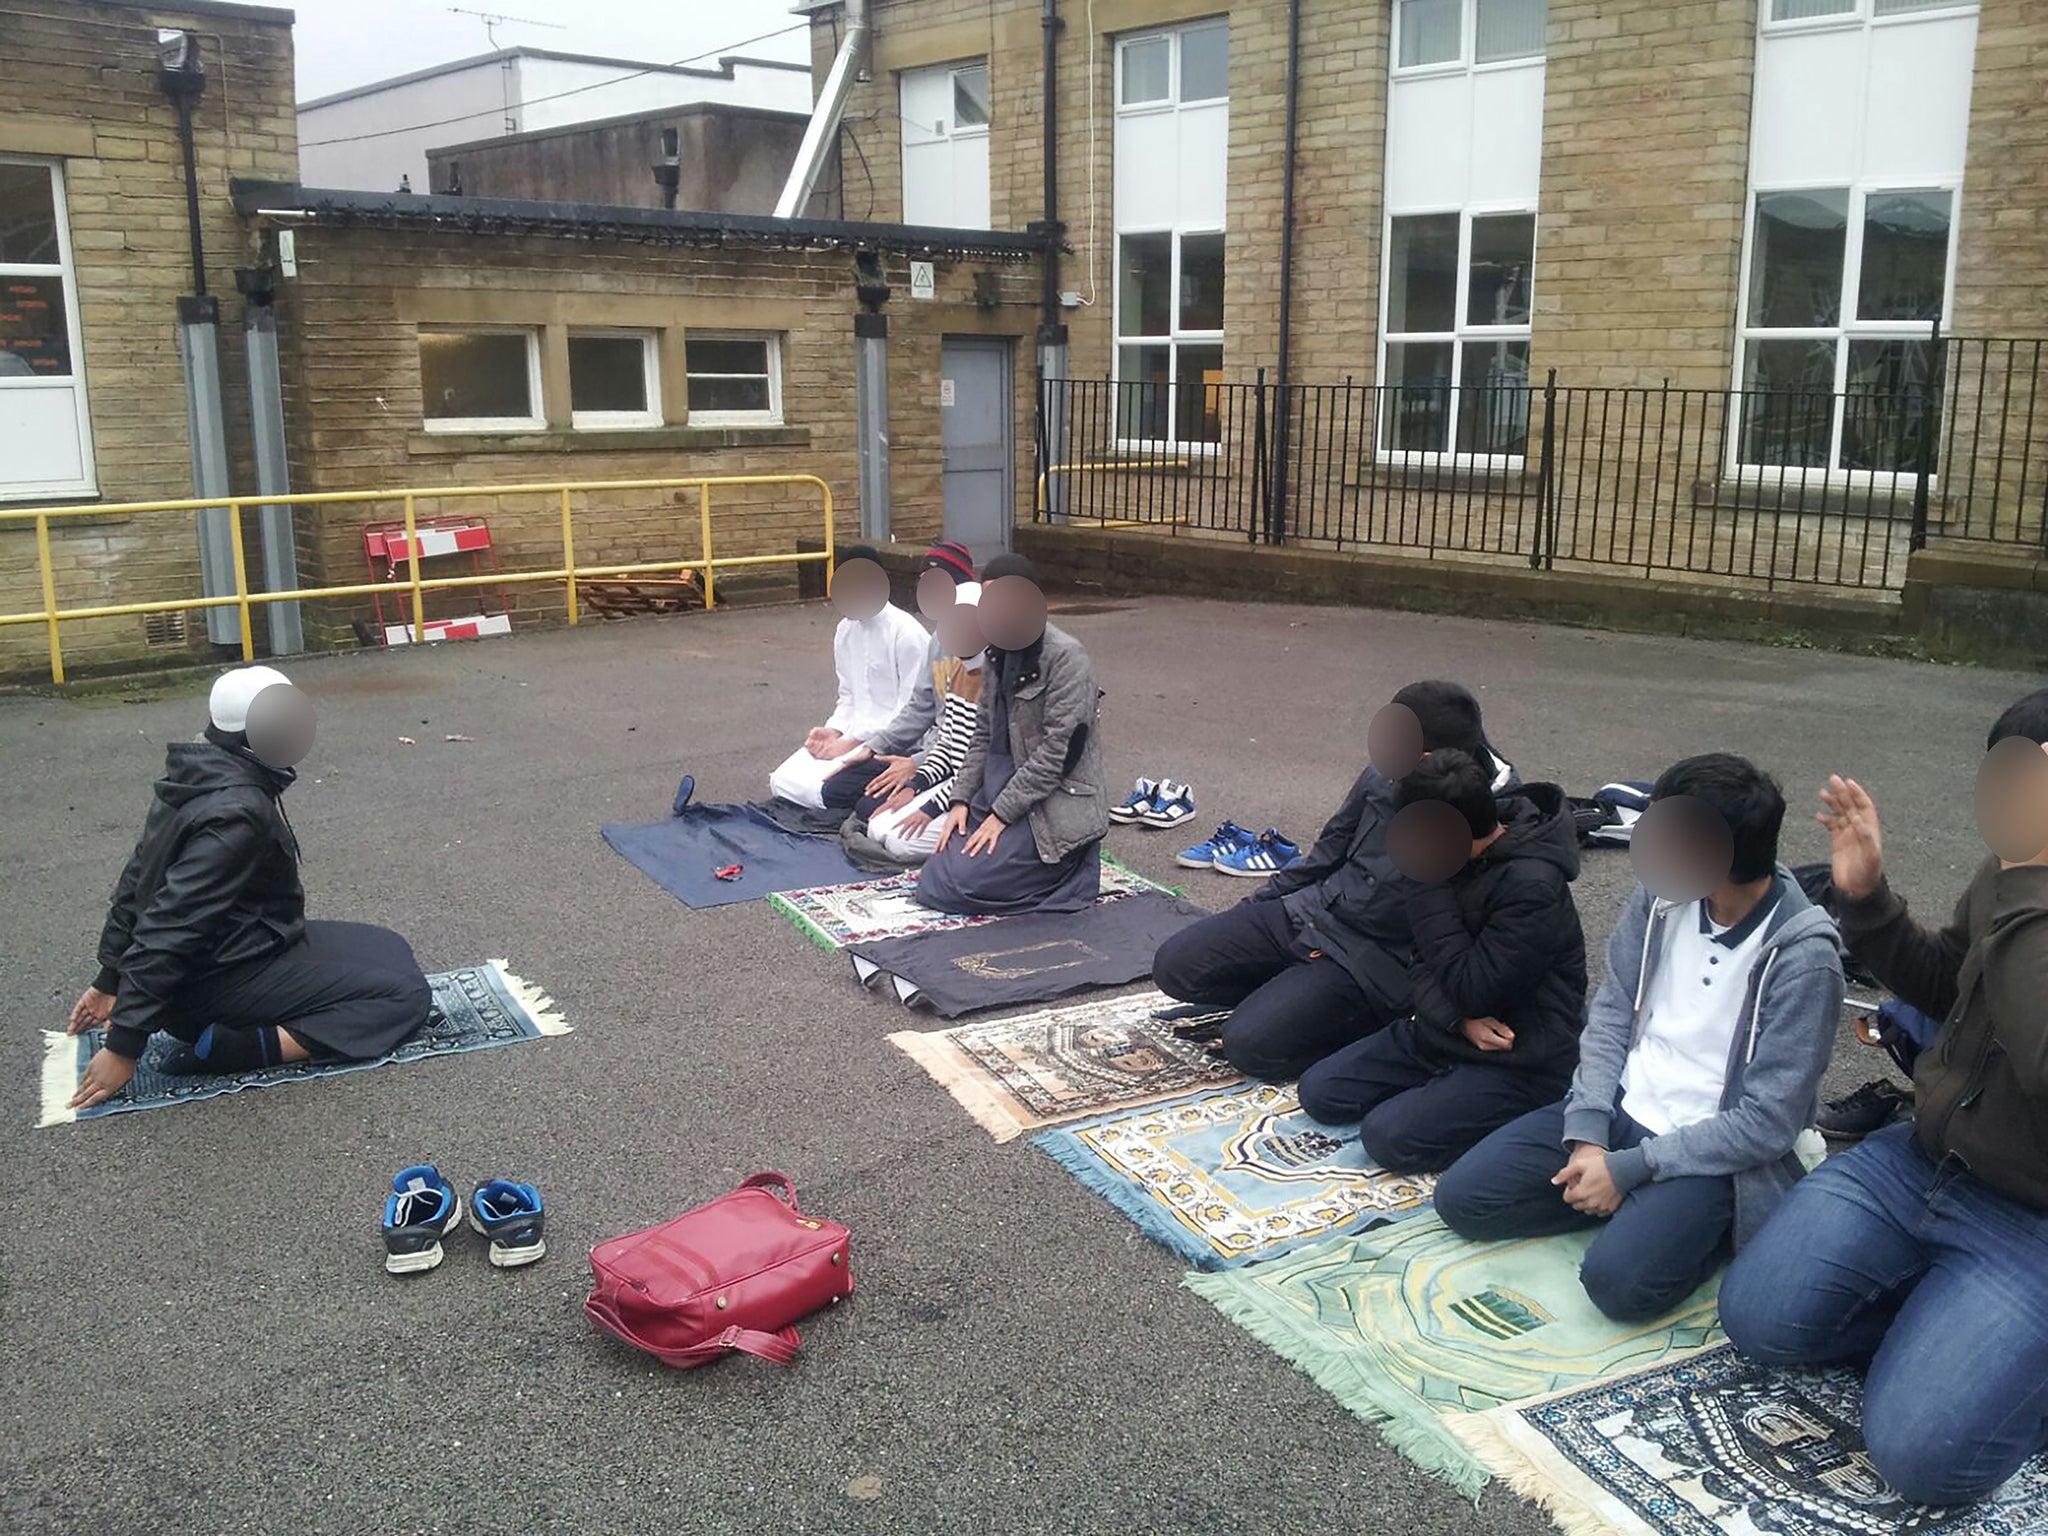 Children pray outside the Mirfield Free Grammar School and Sixth Form in Mirfield, West Yorkshire